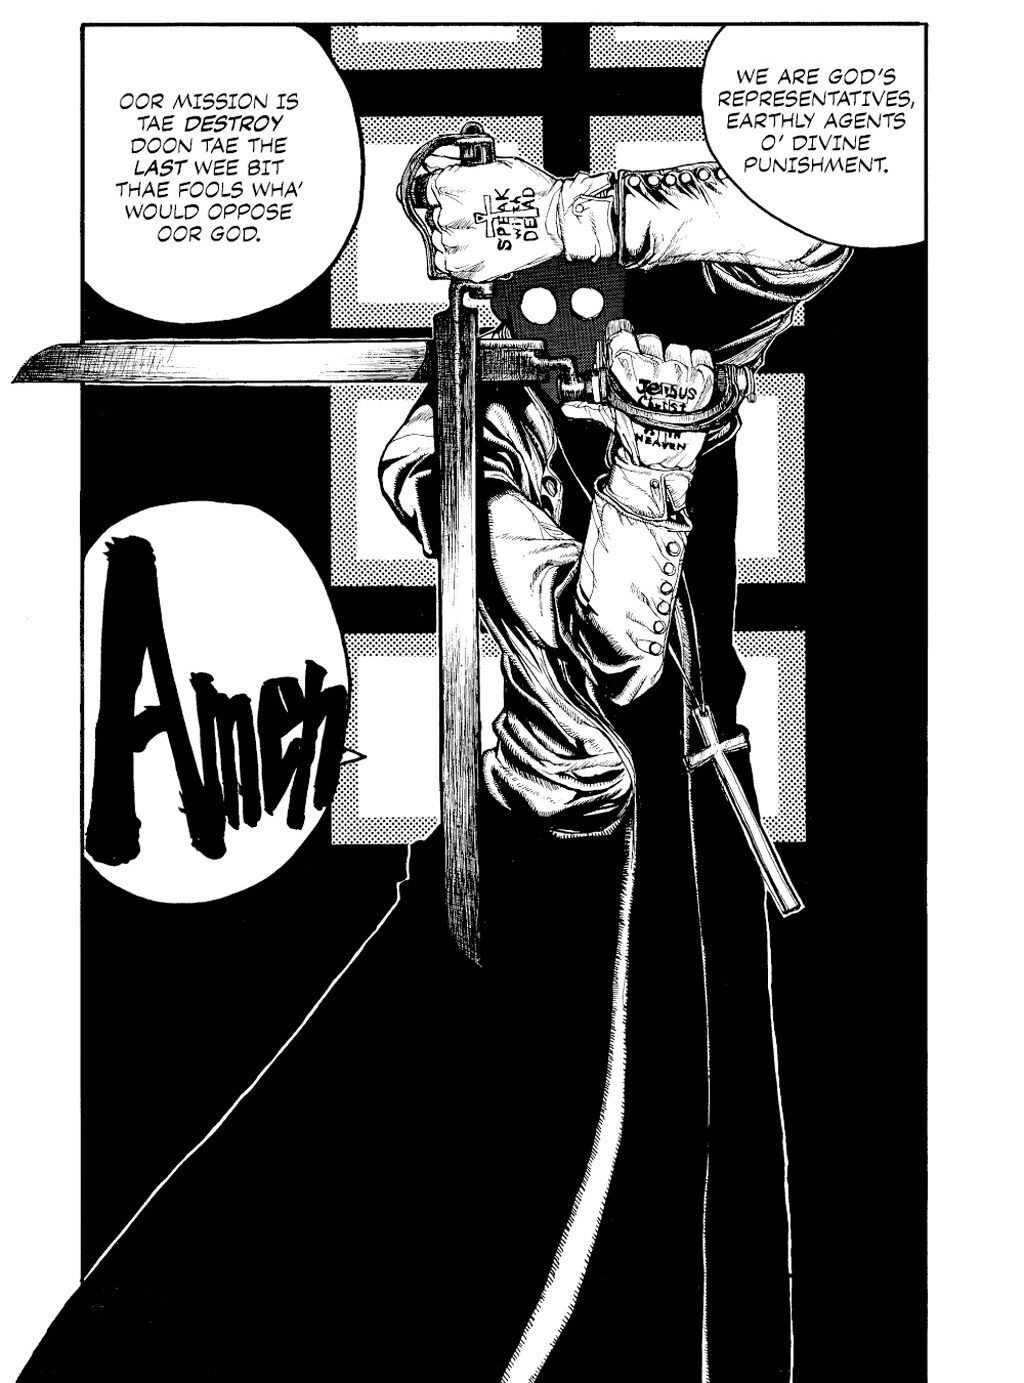 Father Alexander Anderson prepares to defends the Catholic Church's territory in Hellsing Ch. 4 "Sword Dancer 1" (1998), Shōnen Gahōsha